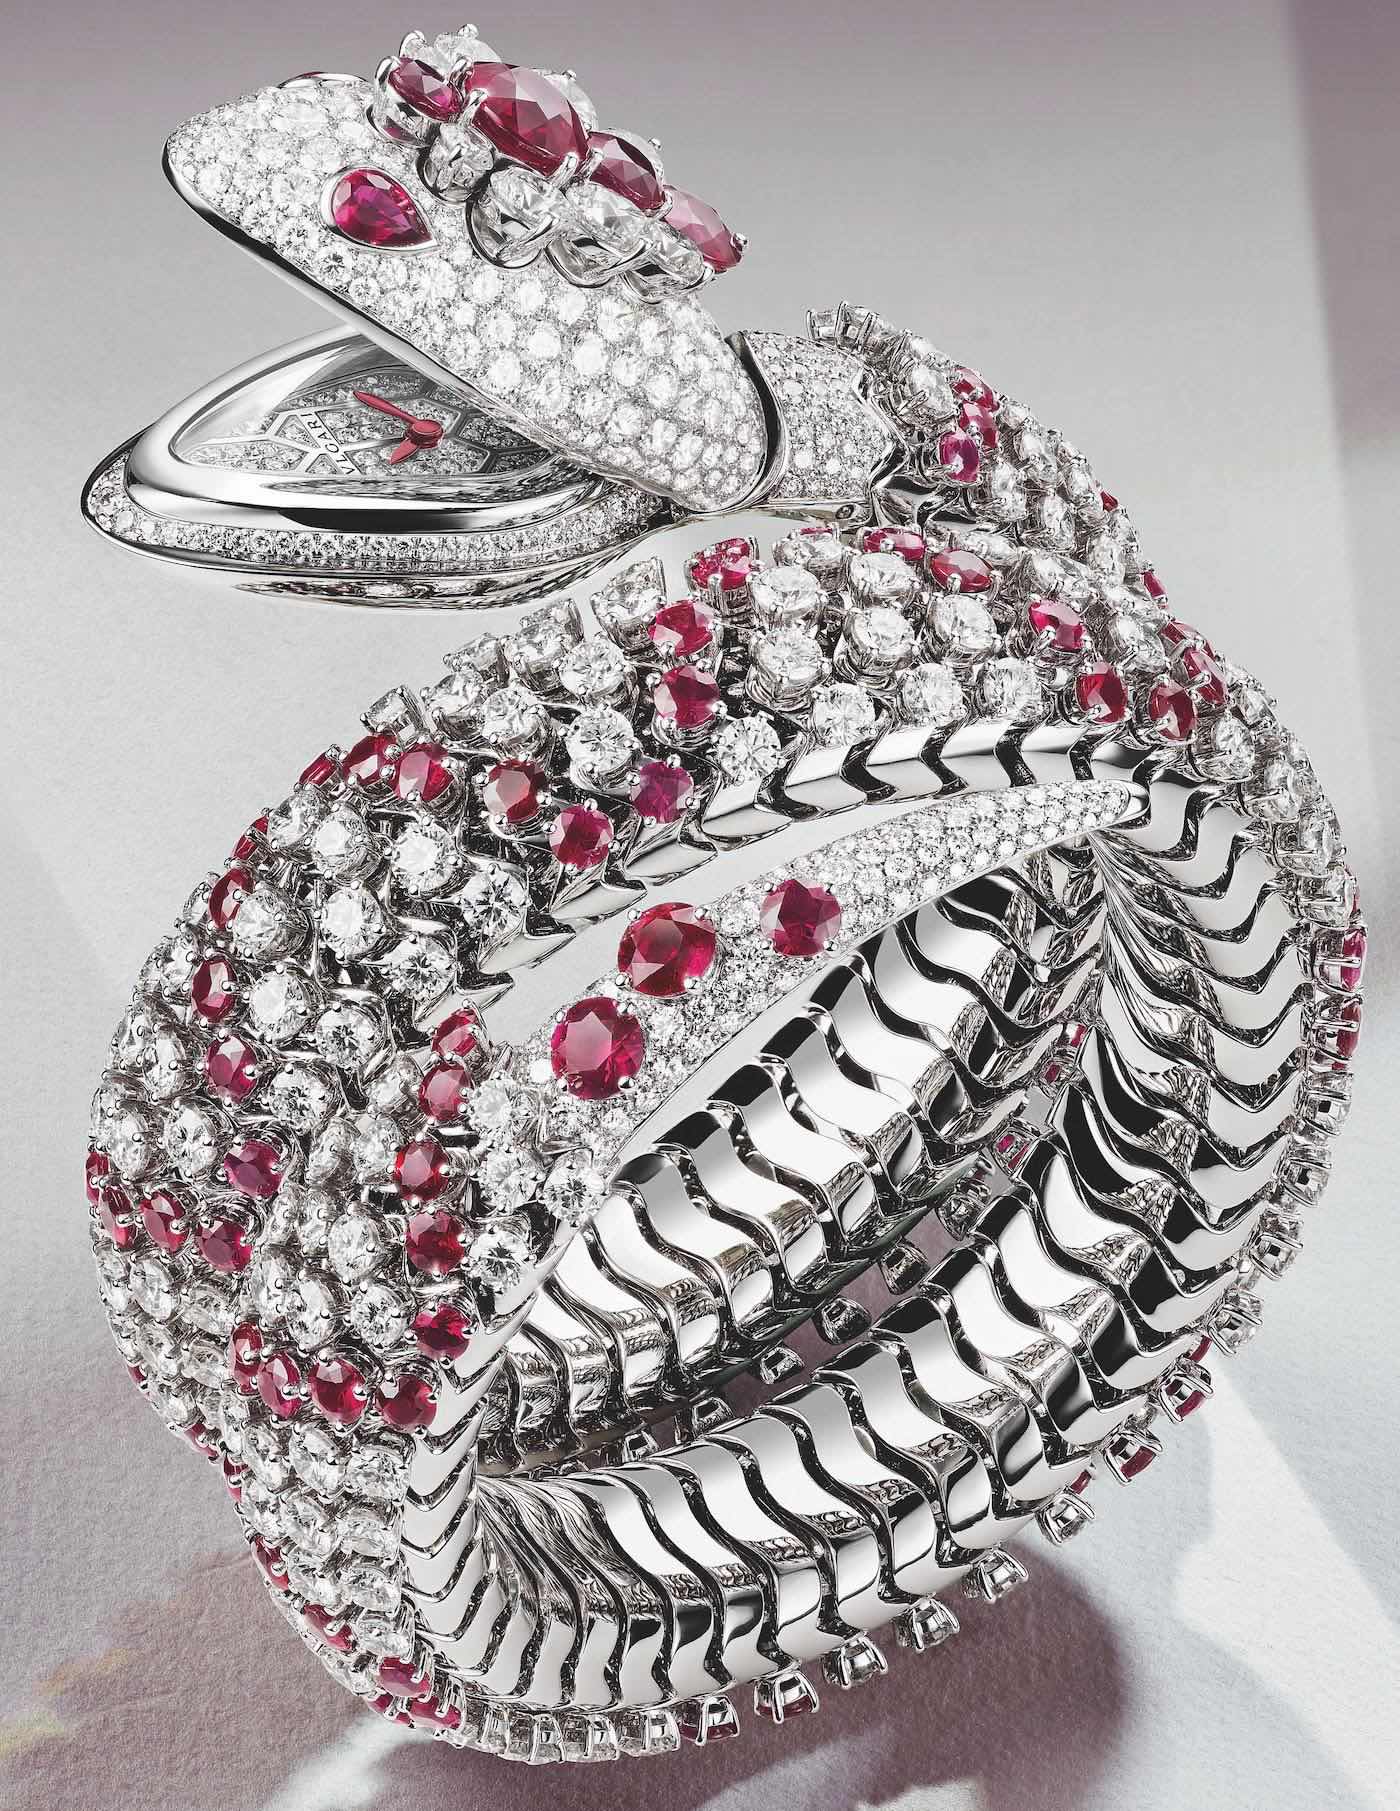 Bulgari Shanghai Collection Of High Jewelry Watches